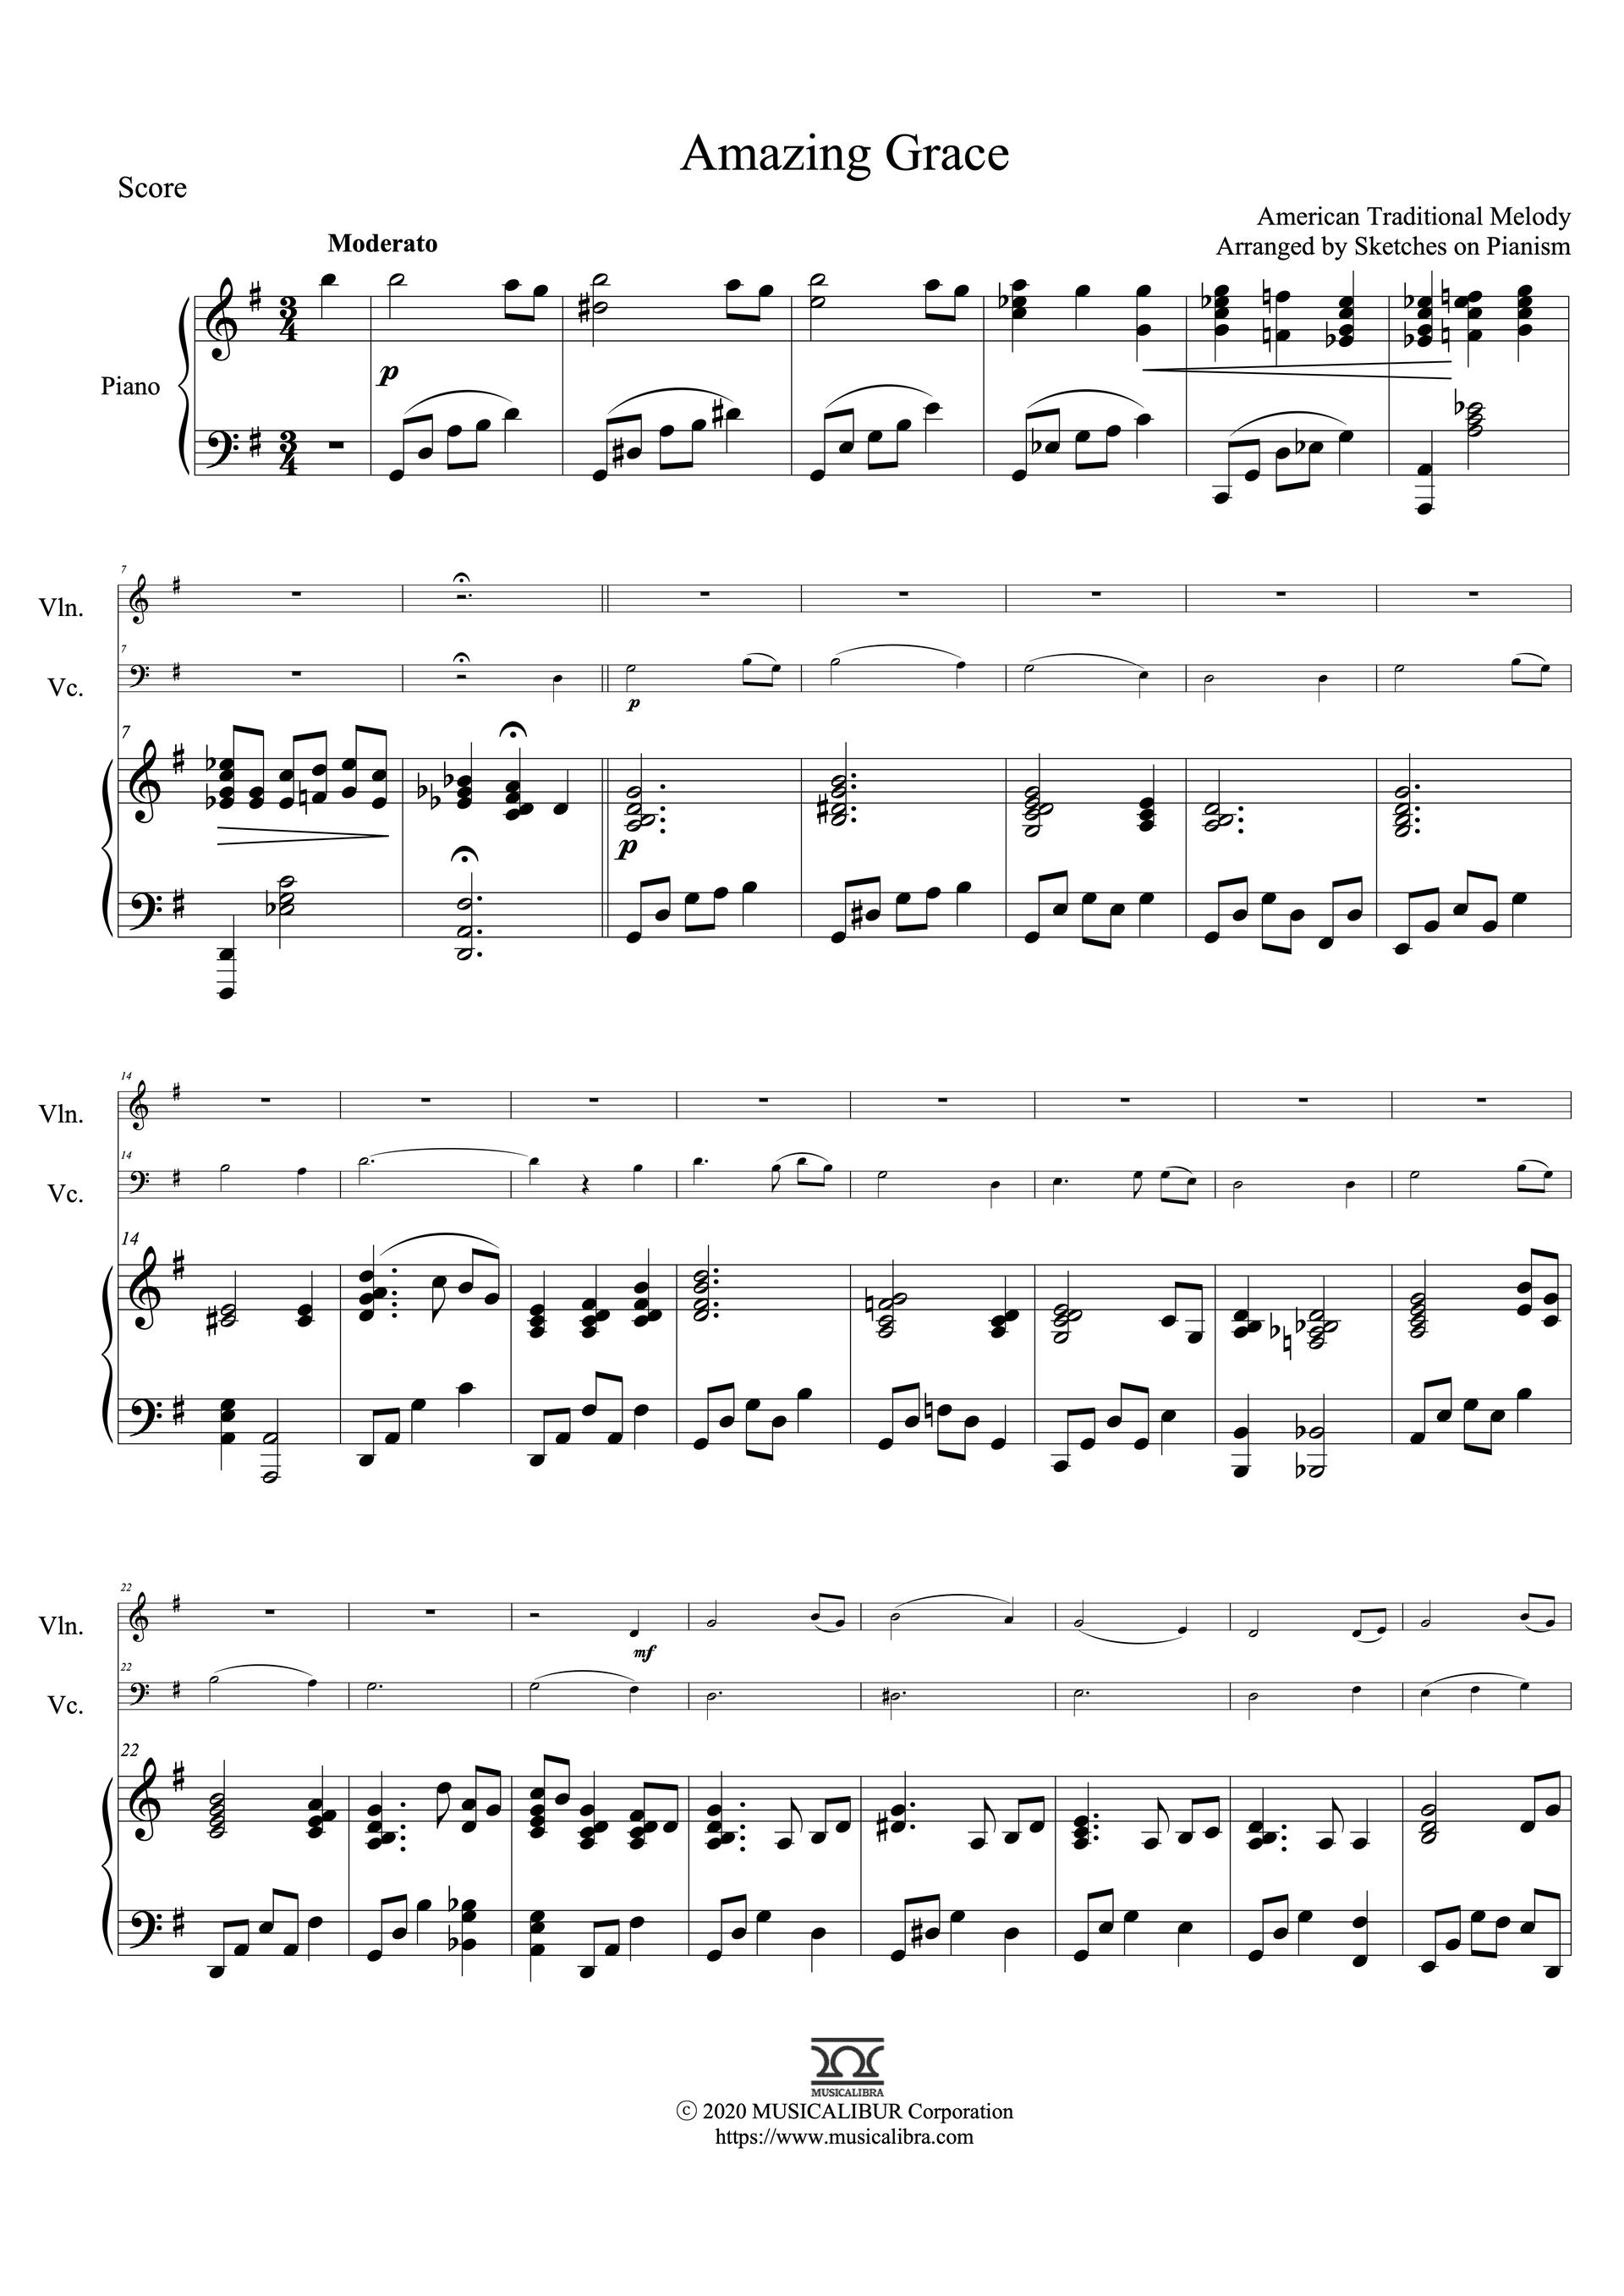 Sheet music of Amazing Grace arranged for violin, cello and piano trio preview page 1